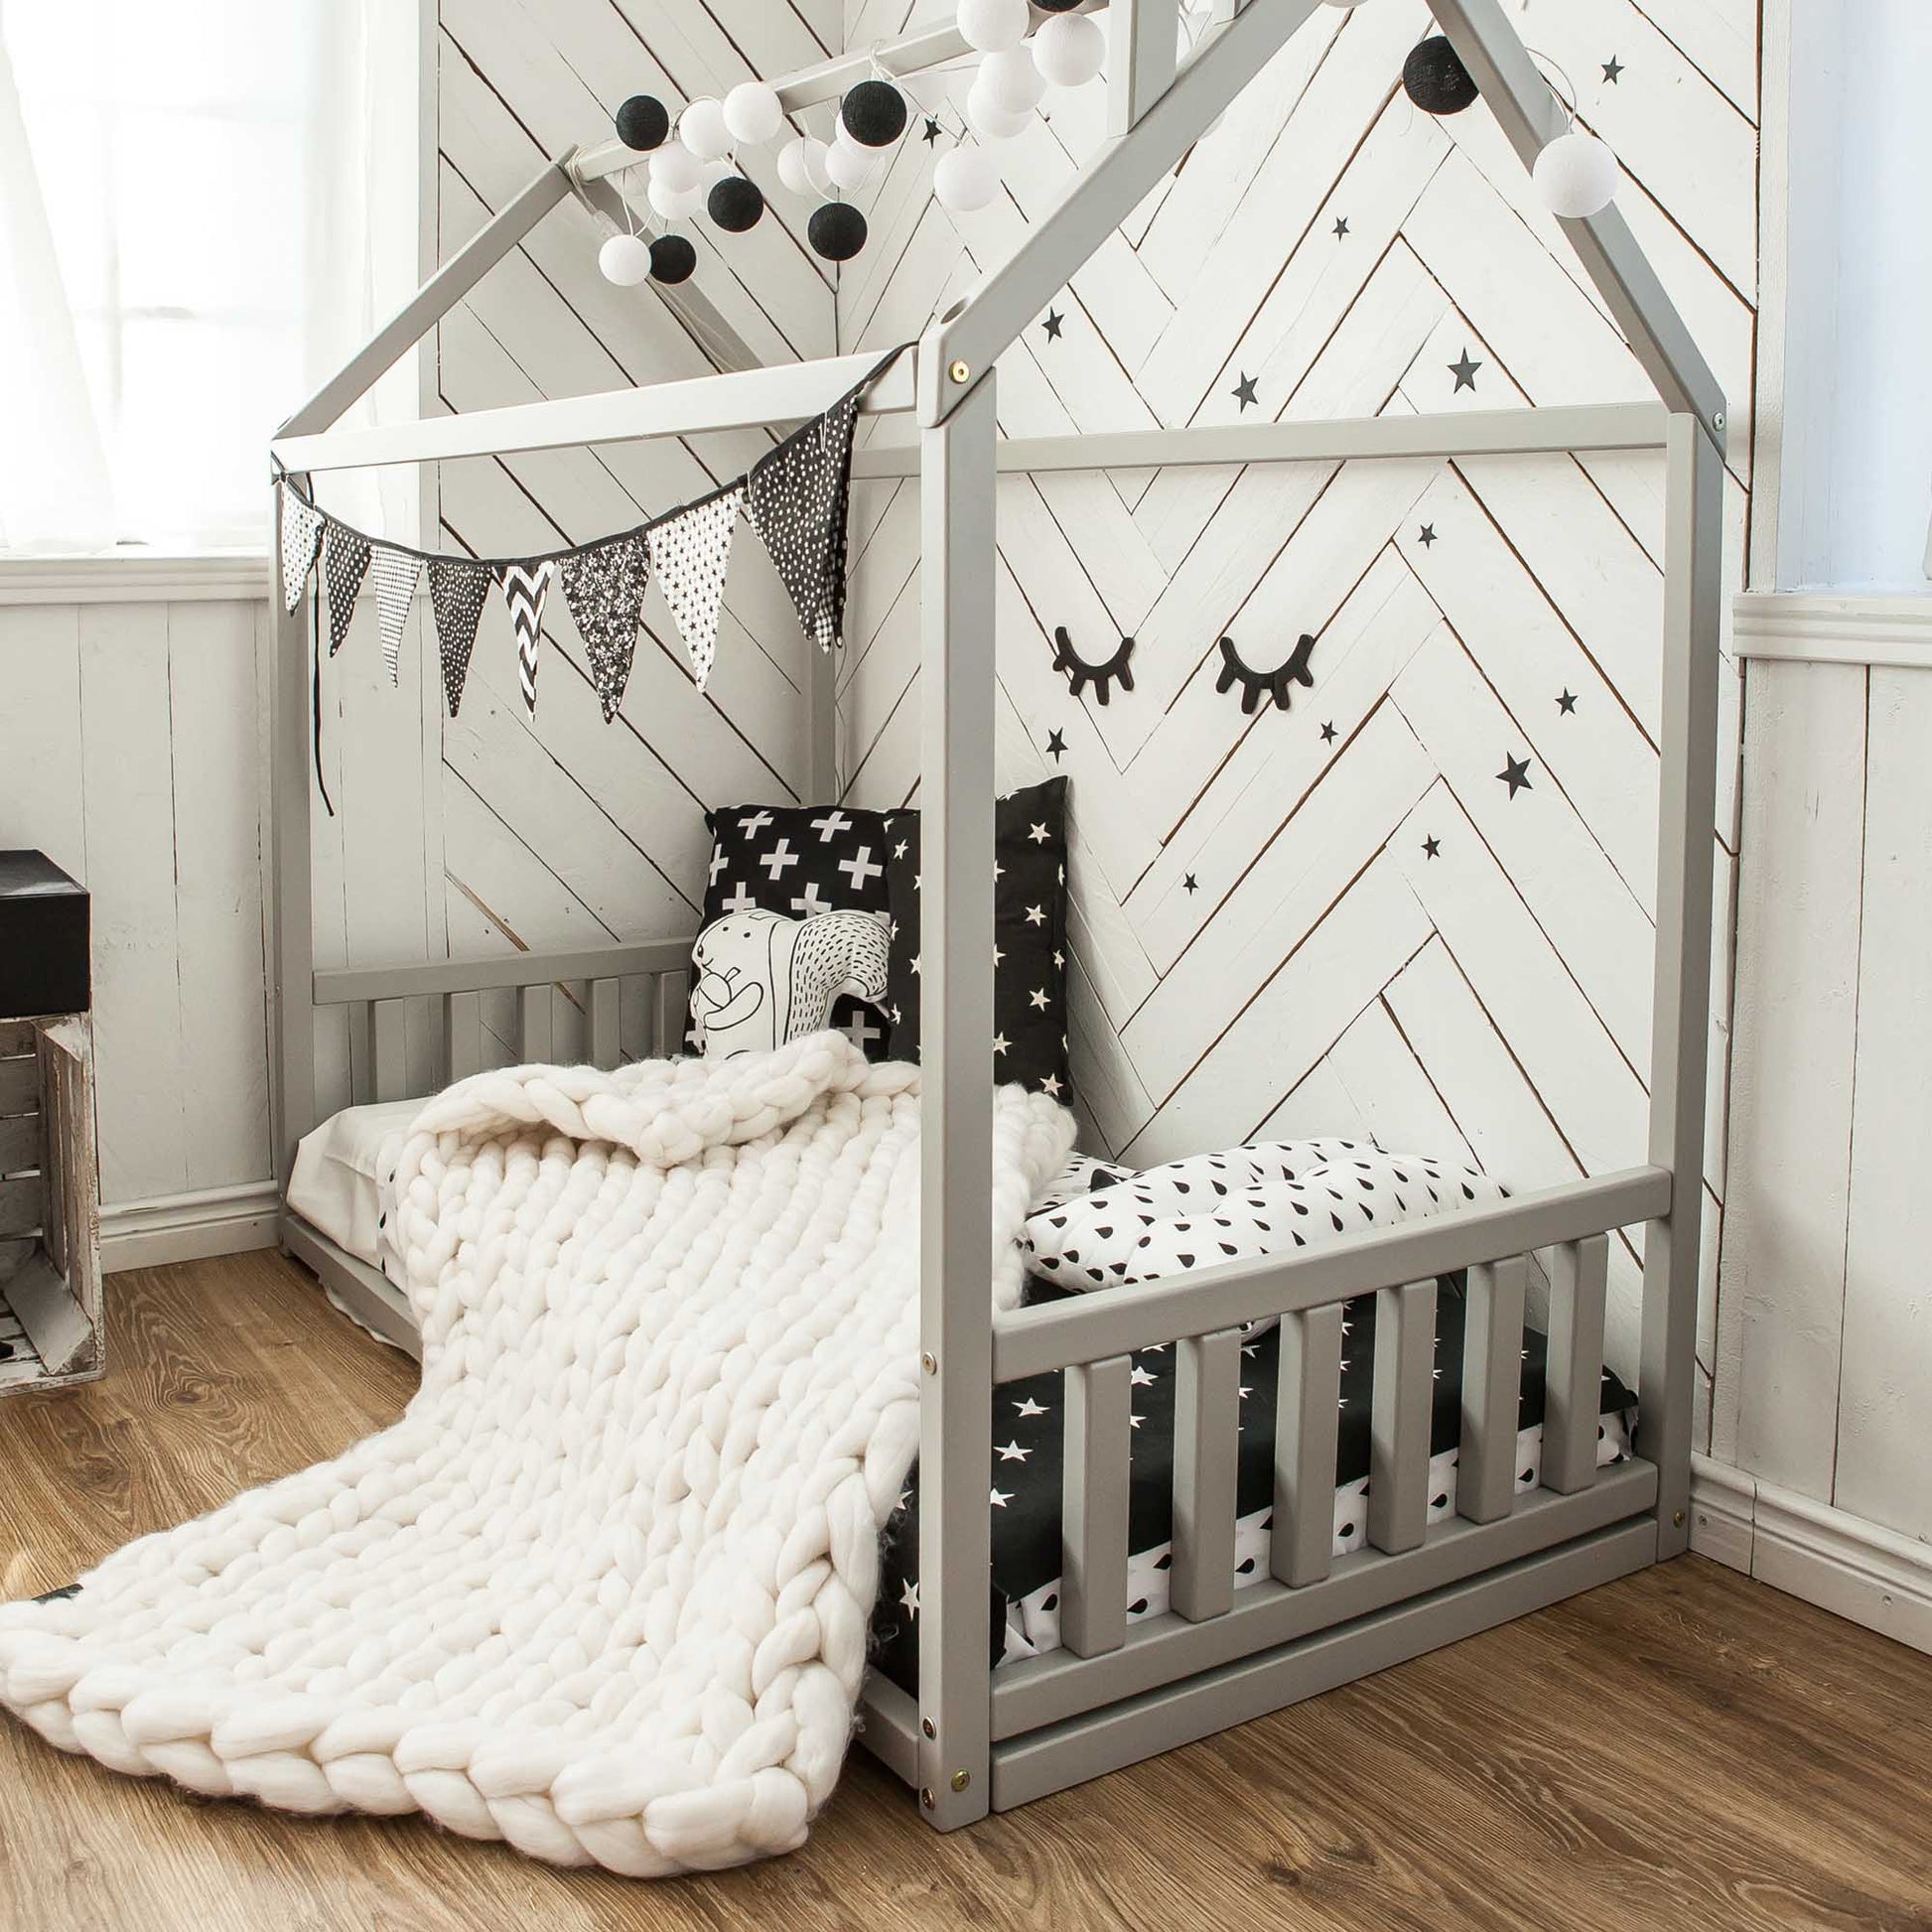 A Sweet Home From Wood Toddler house bed with a headboard and footboard, featuring a stylish black and white design inspired by Montessori, creating a sleep haven.